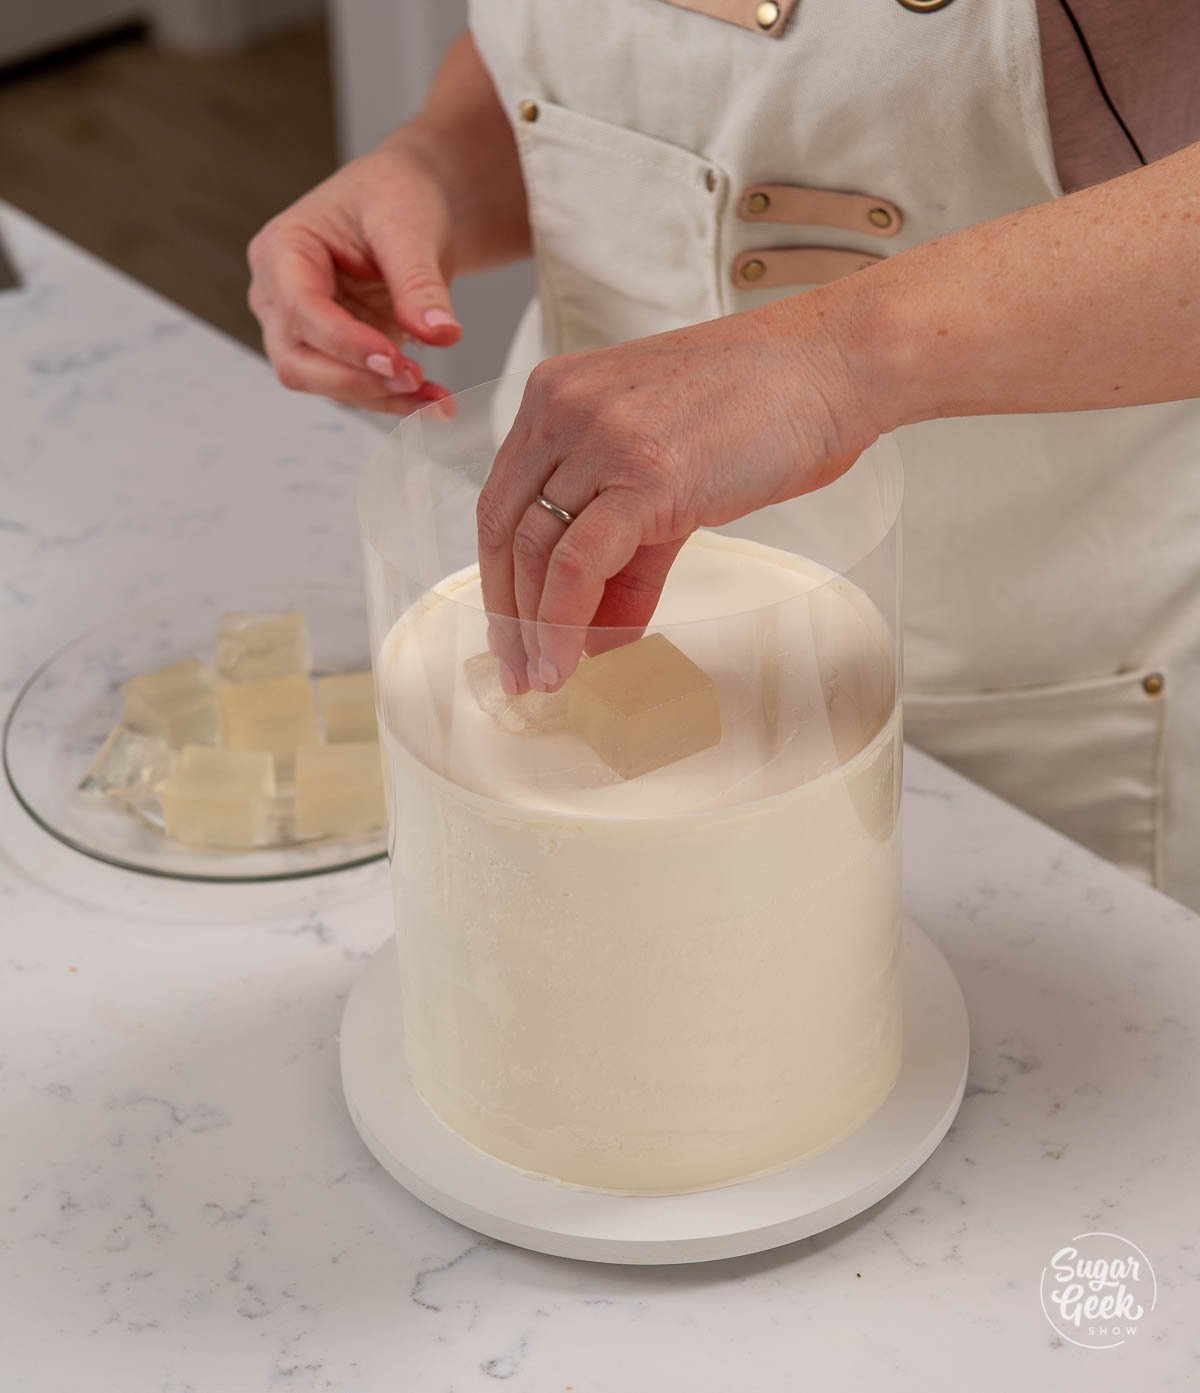 adding the margarita gelatin ice cubes to the top of the cake